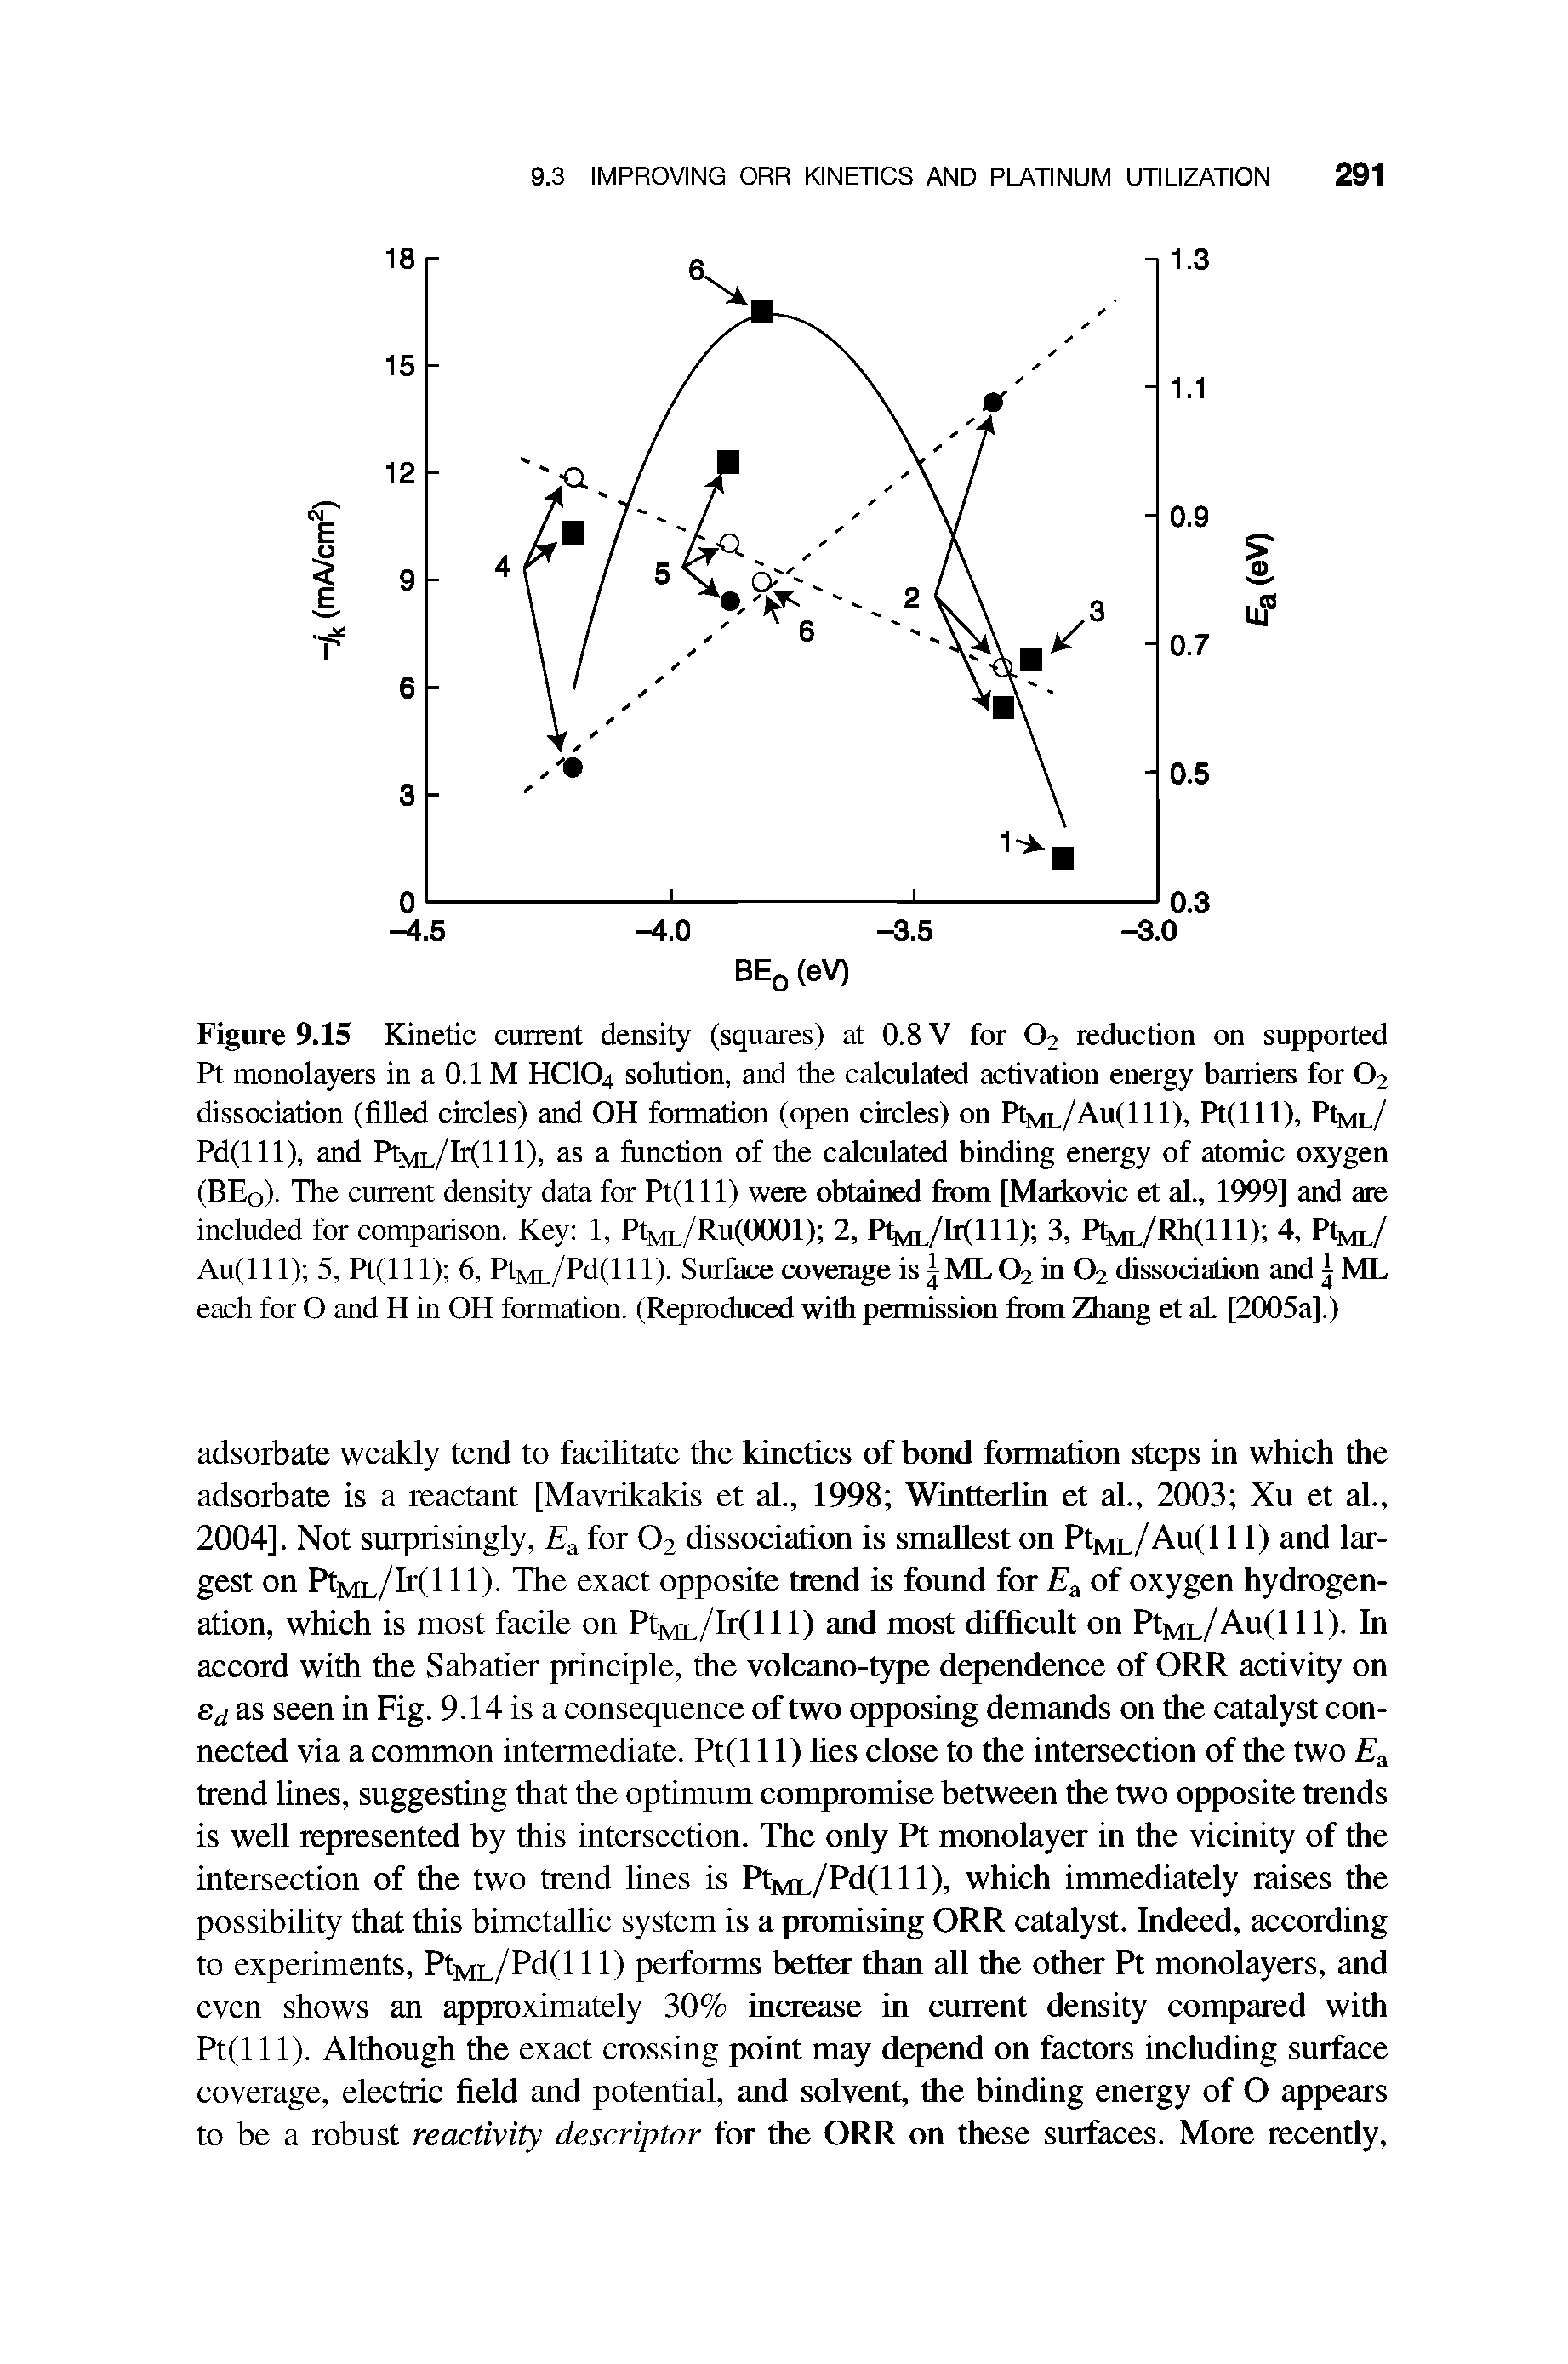 Figure 9.15 Kinetic current density (squares) at 0.8 V for O2 reduction on supported Pt monolayers in a 0.1 M HCIO4 solution, and the calculated activation energy barriers for O2 dissociation (filled circles) and OH formation (open circles) on PtML/Au(lll), Pt(lll), PtML/ Pd(lll), and PtML/lT(lll). as a function of the calculated binding energy of atomic oxygen (BEo). The current density data for Pt(lll) were obtained fiom [Maikovic et al., 1999] and ate included for comparison. Key 1, Pt]y[L/Ru(0001) 2, Pb /bllll) 3, PtML/Rh(lH)i 4, Ptim,/ Au(lll) 5, Pt(lll) 6, PtML/Pd(lll). Surface coverage is ML O2 in O2 dissociation and ML each for O and H in OH formation. (Reproduced with permission fiom Zhang et al. [2005a].)...